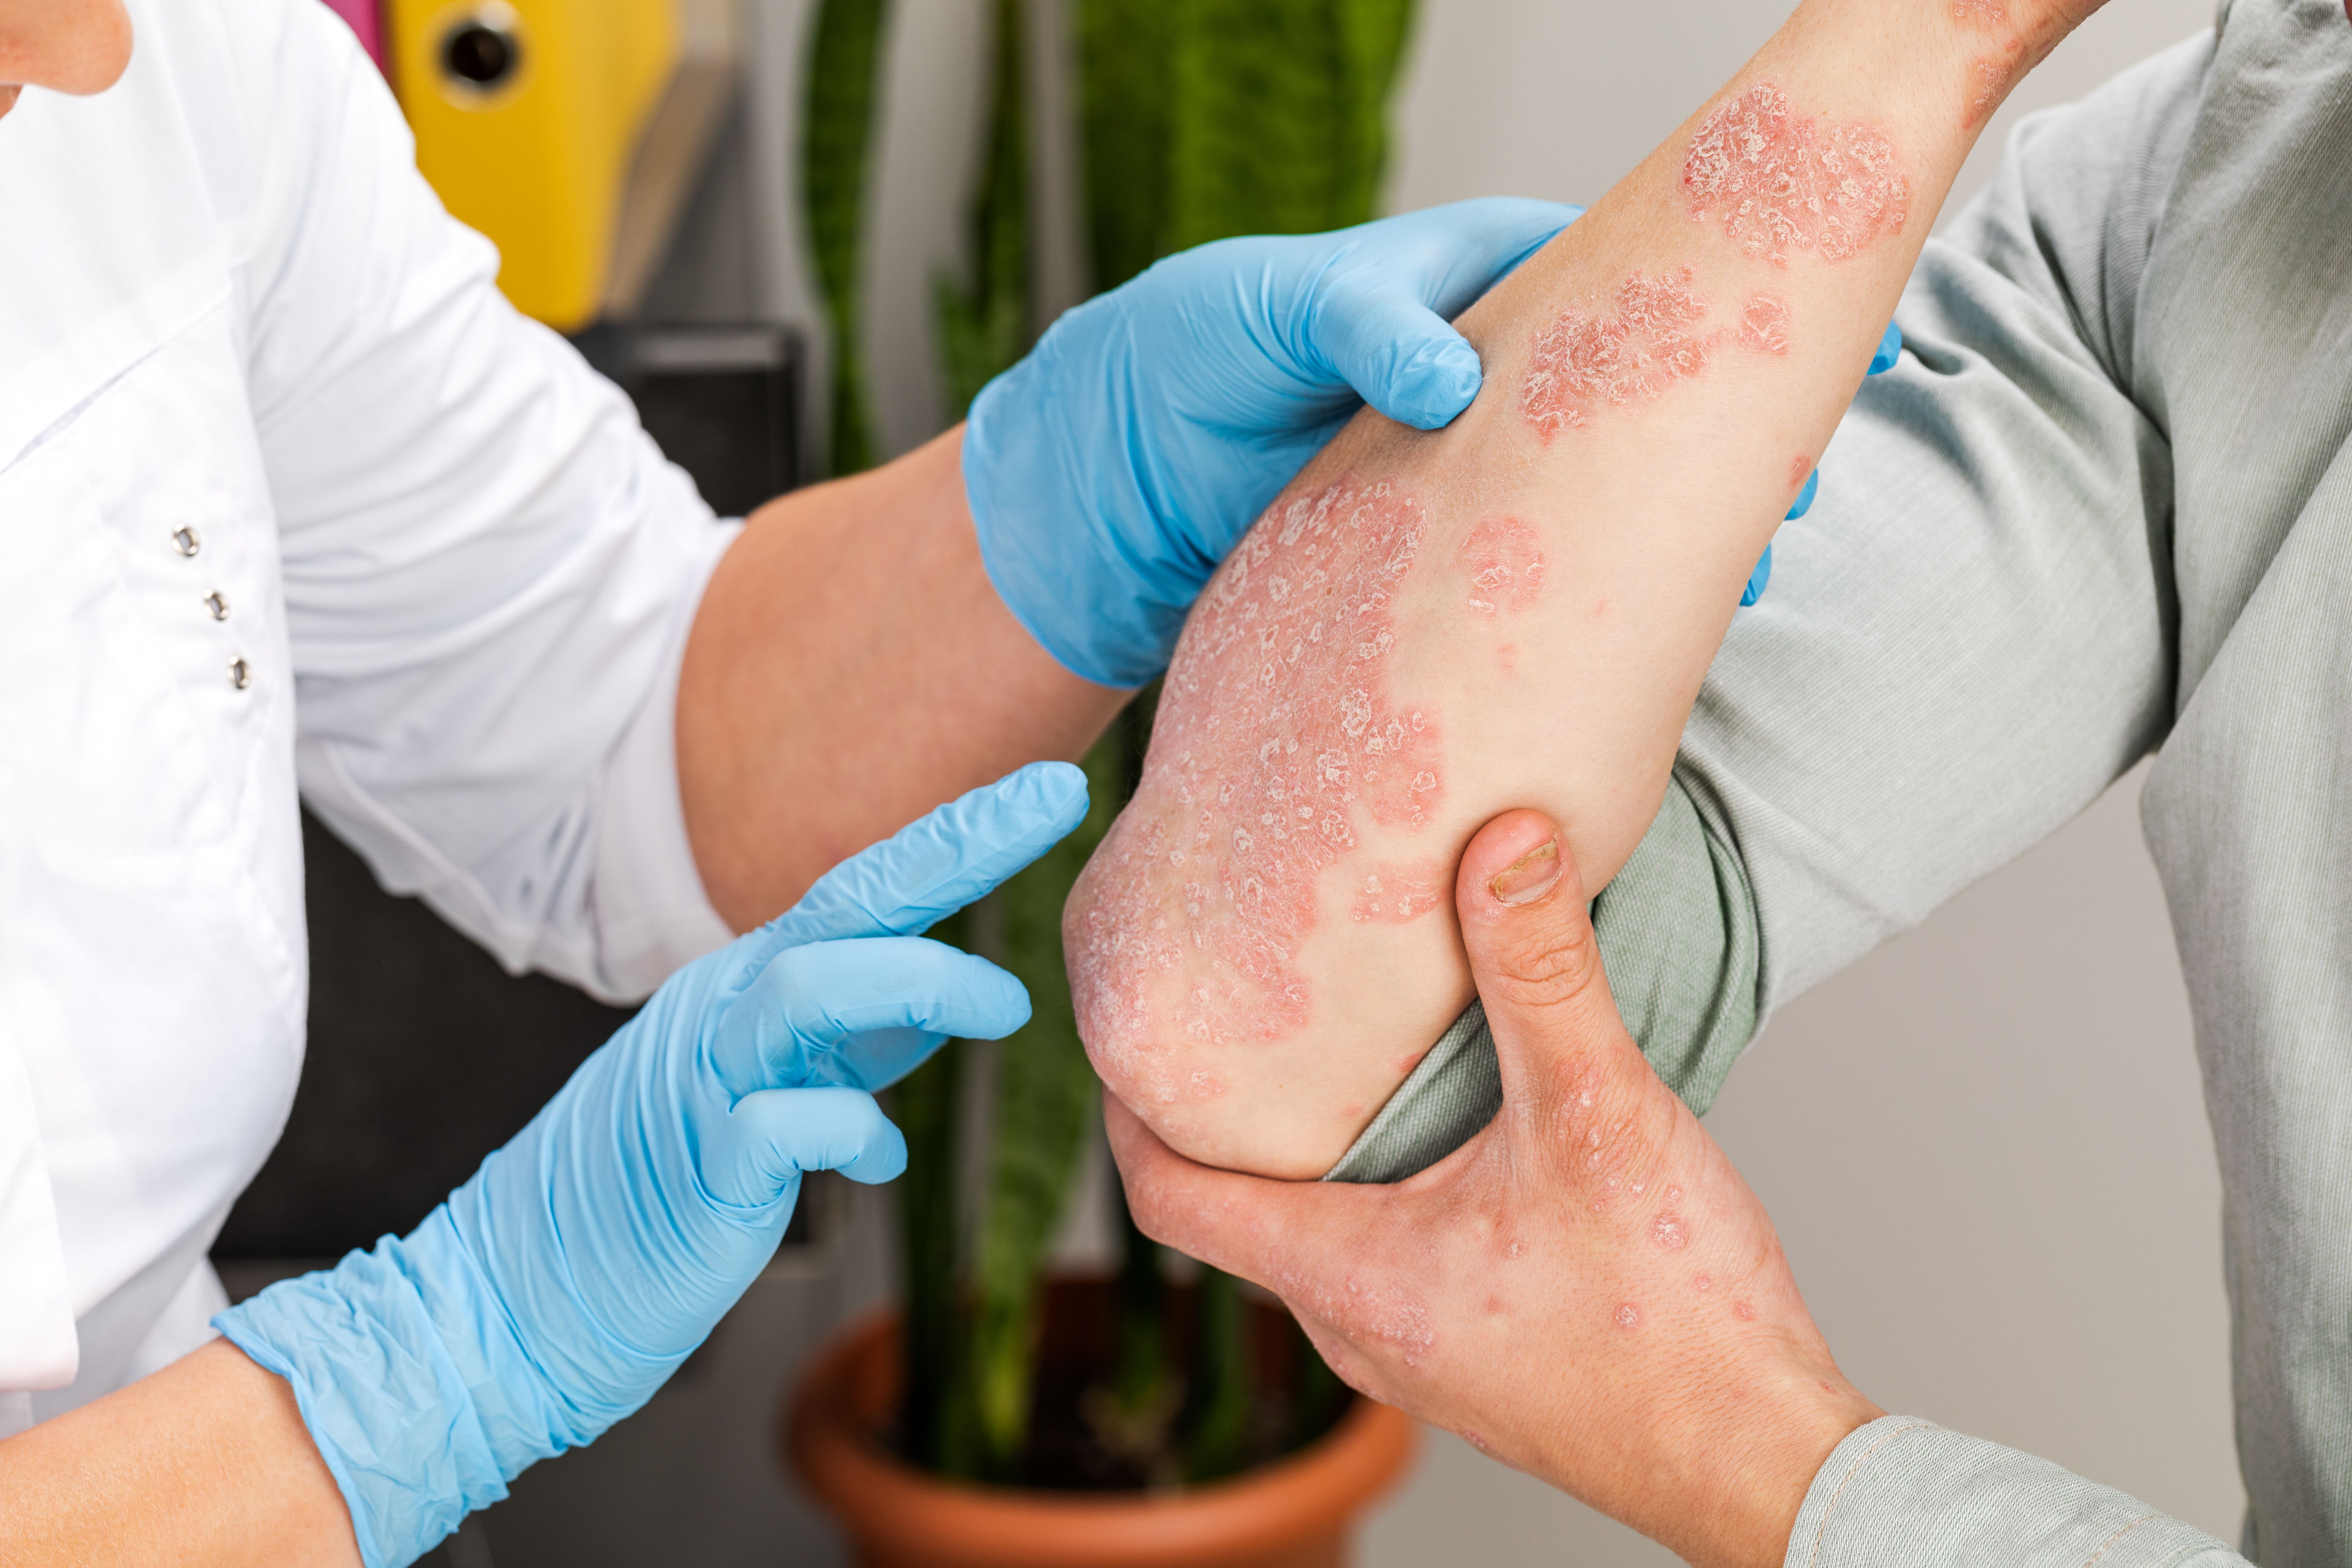 A dermatologist wearing gloves examines the skin of a sick patient. Examination and diagnosis of skin diseases-allergies, psoriasis, eczema, dermatitis | Image credit: © fusssergei - stock.adobe.com